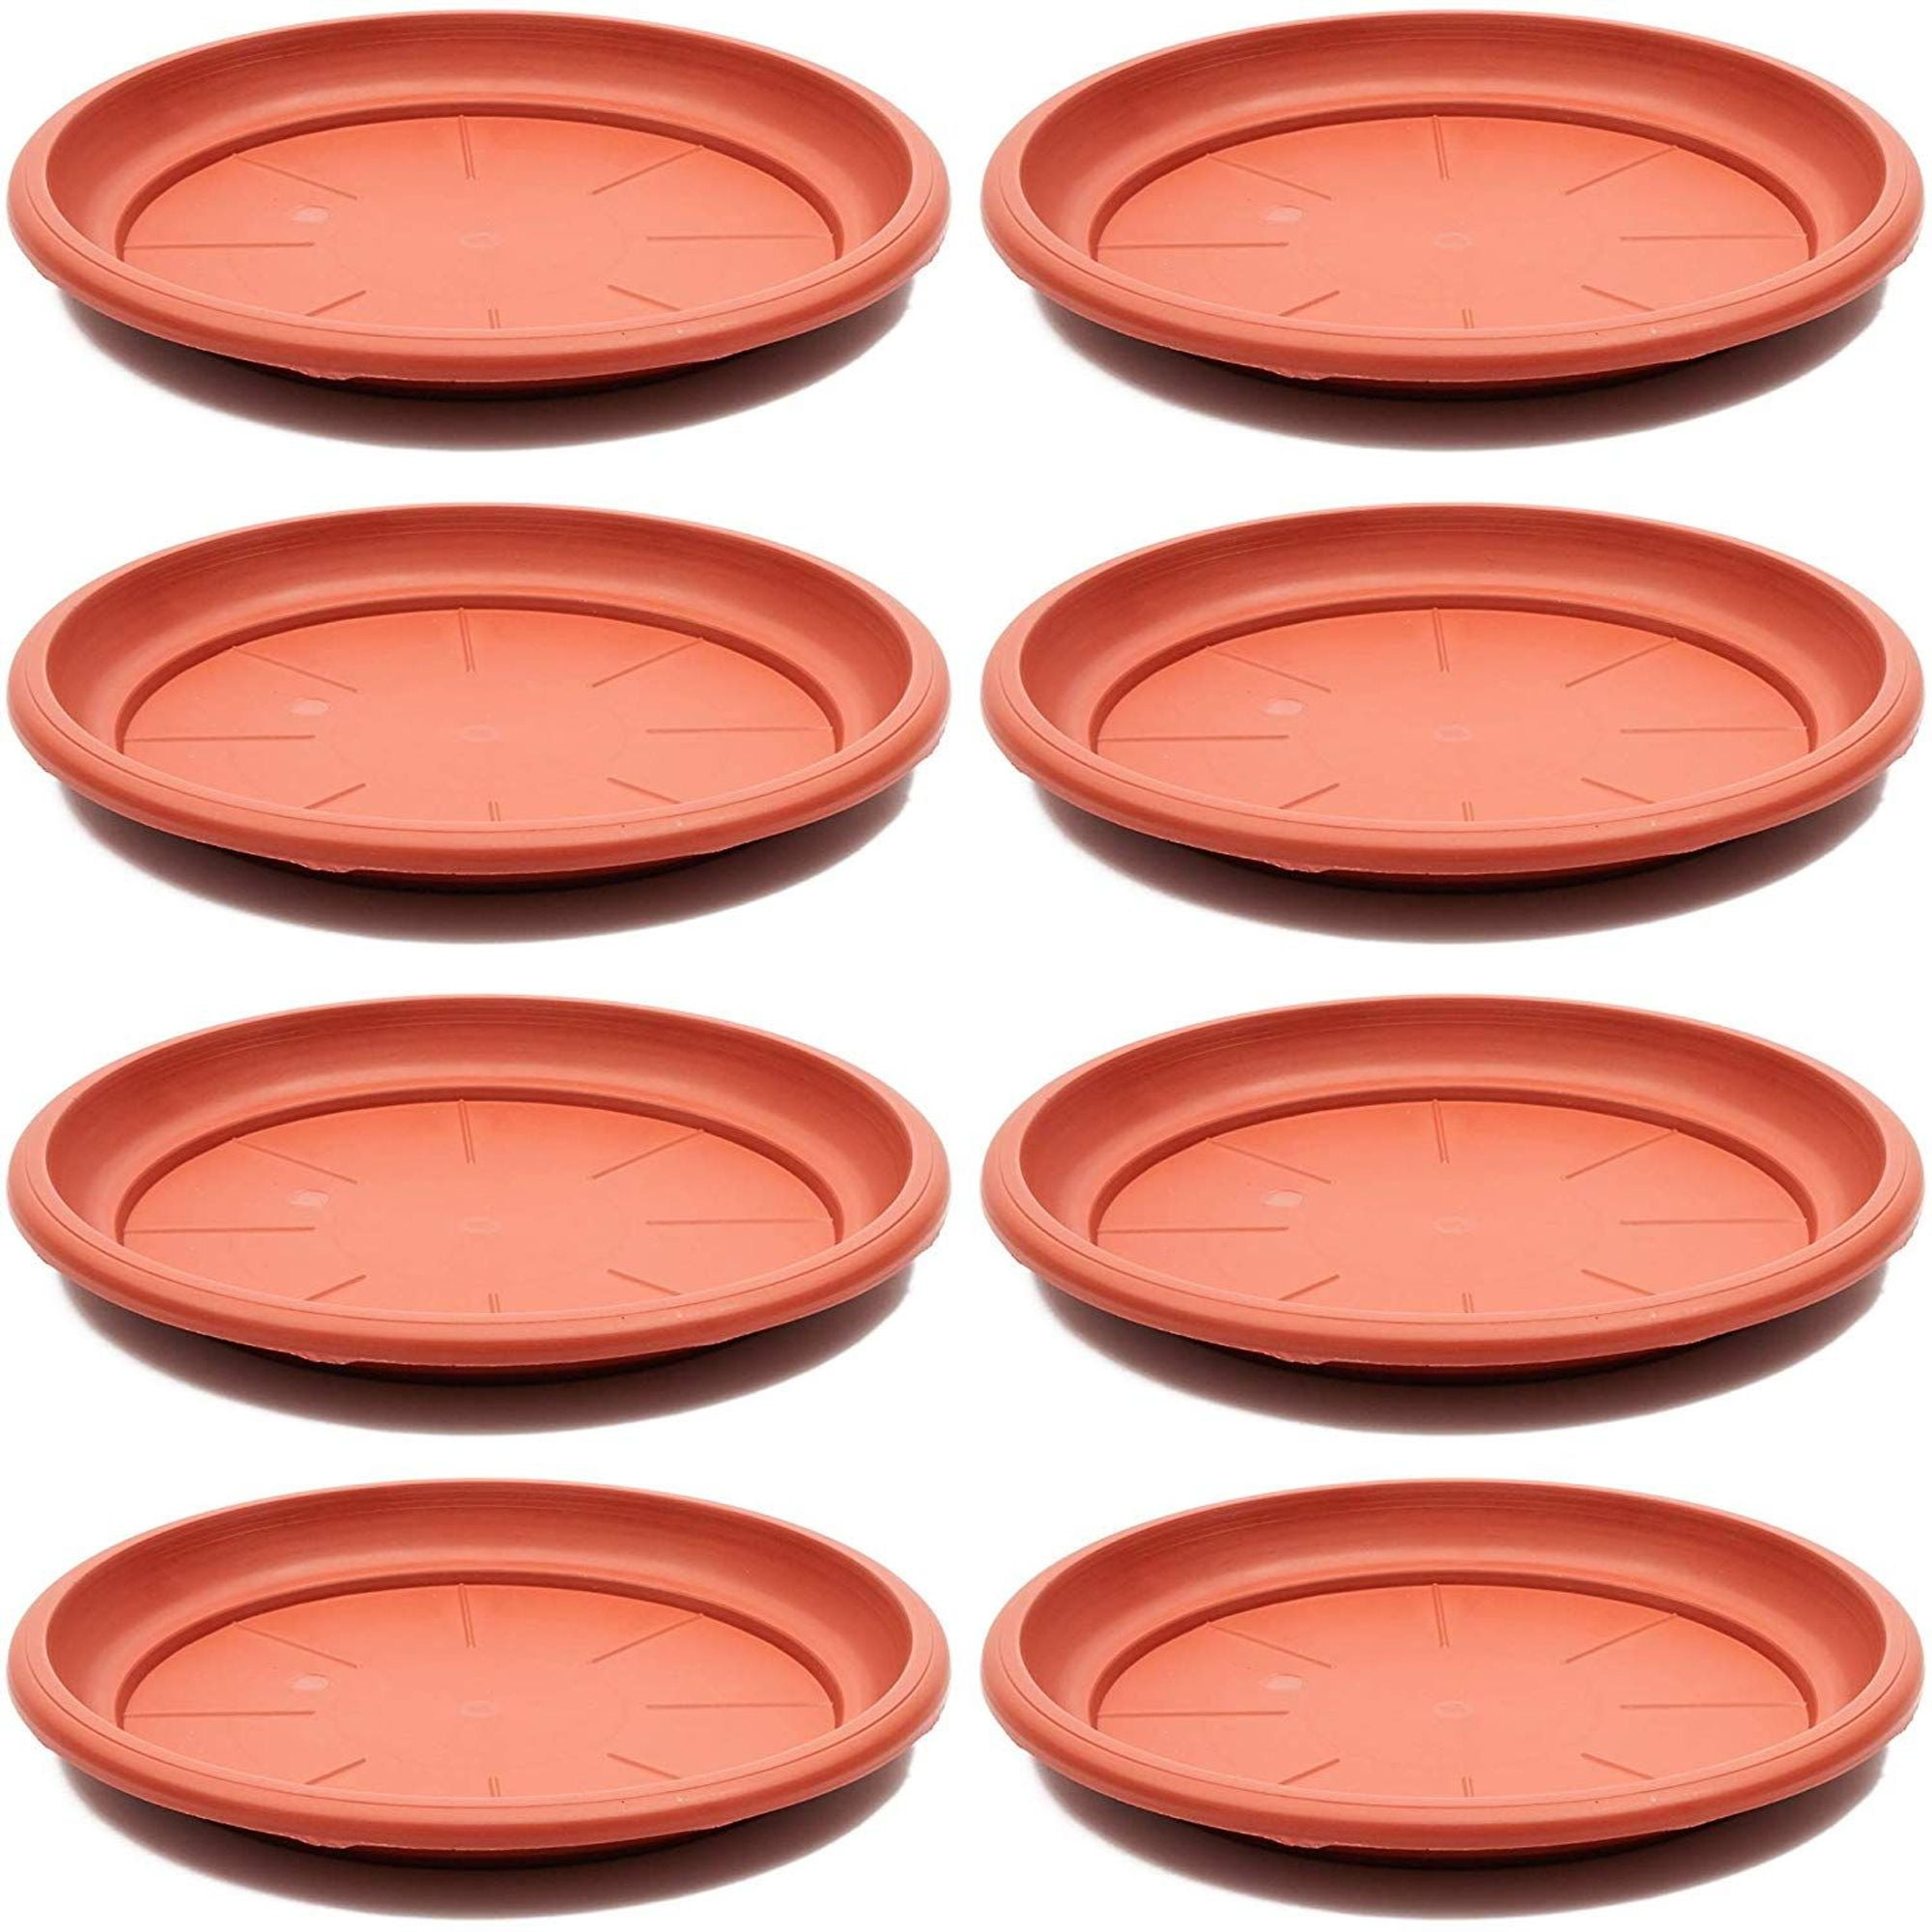 50 x 23cm Plant Pot Saucer Drip Tray Terracotta Plastic Deep High Sided Strong 